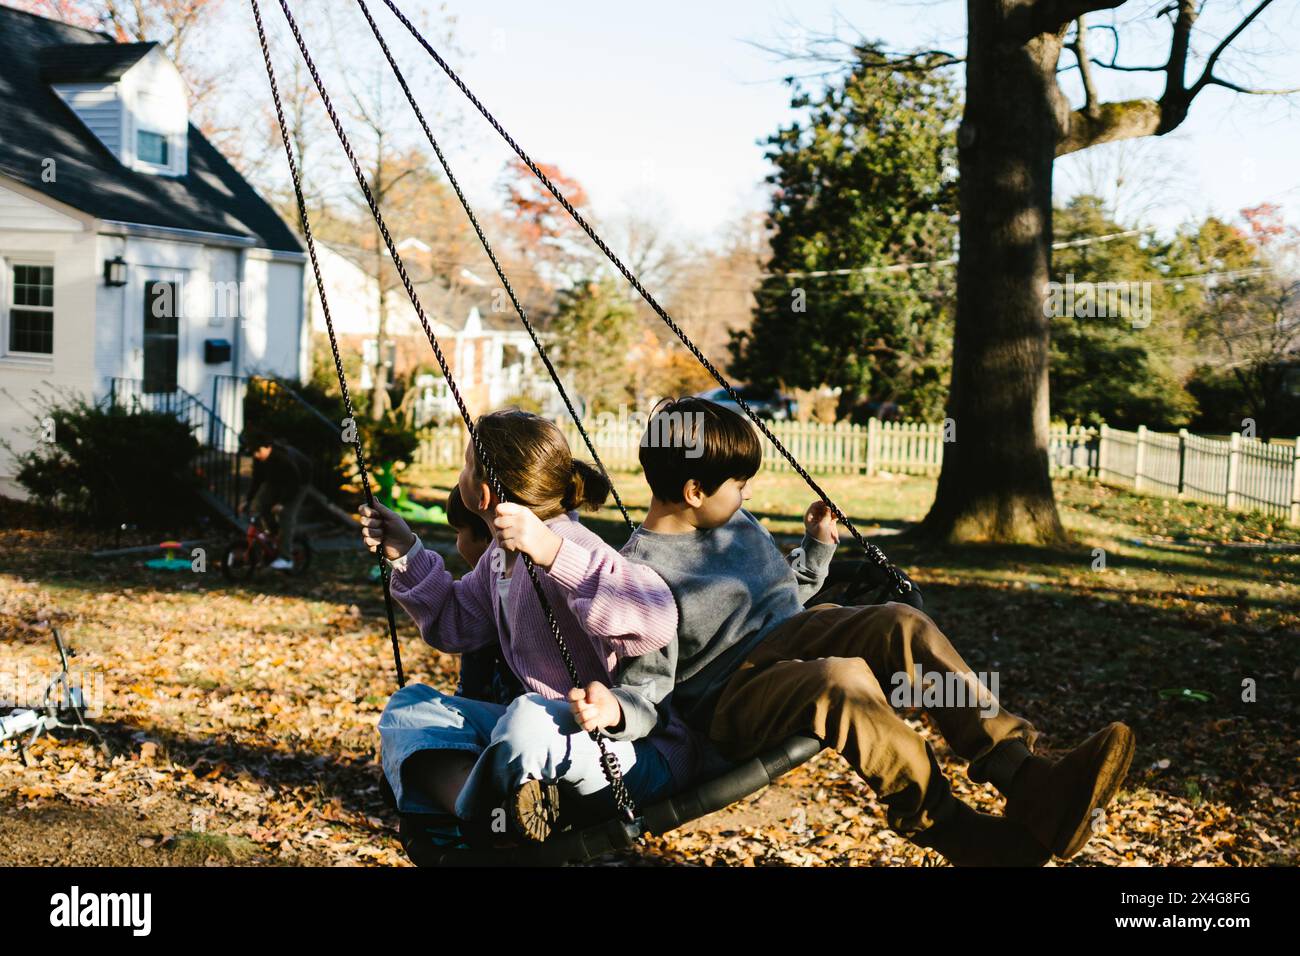 Cousins on tree swing in front yard under trees in autumn Stock Photo